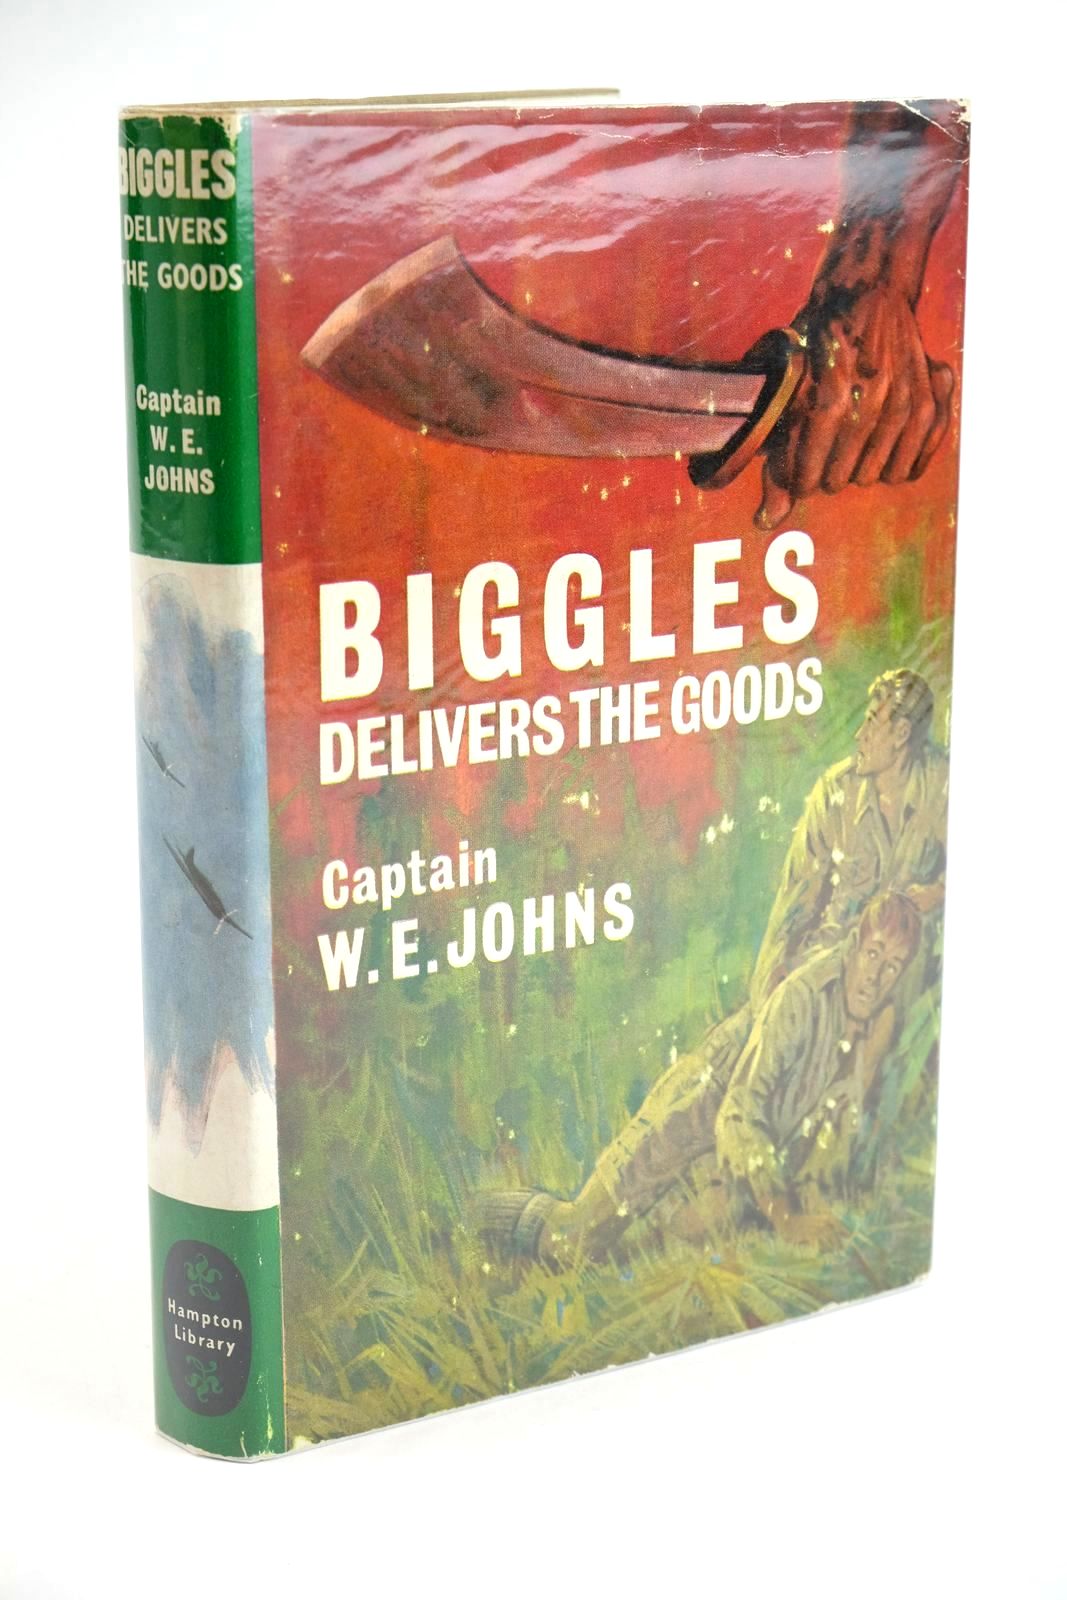 Photo of BIGGLES DELIVERS THE GOODS written by Johns, W.E. illustrated by Stead,  published by Hodder & Stoughton (STOCK CODE: 1323463)  for sale by Stella & Rose's Books